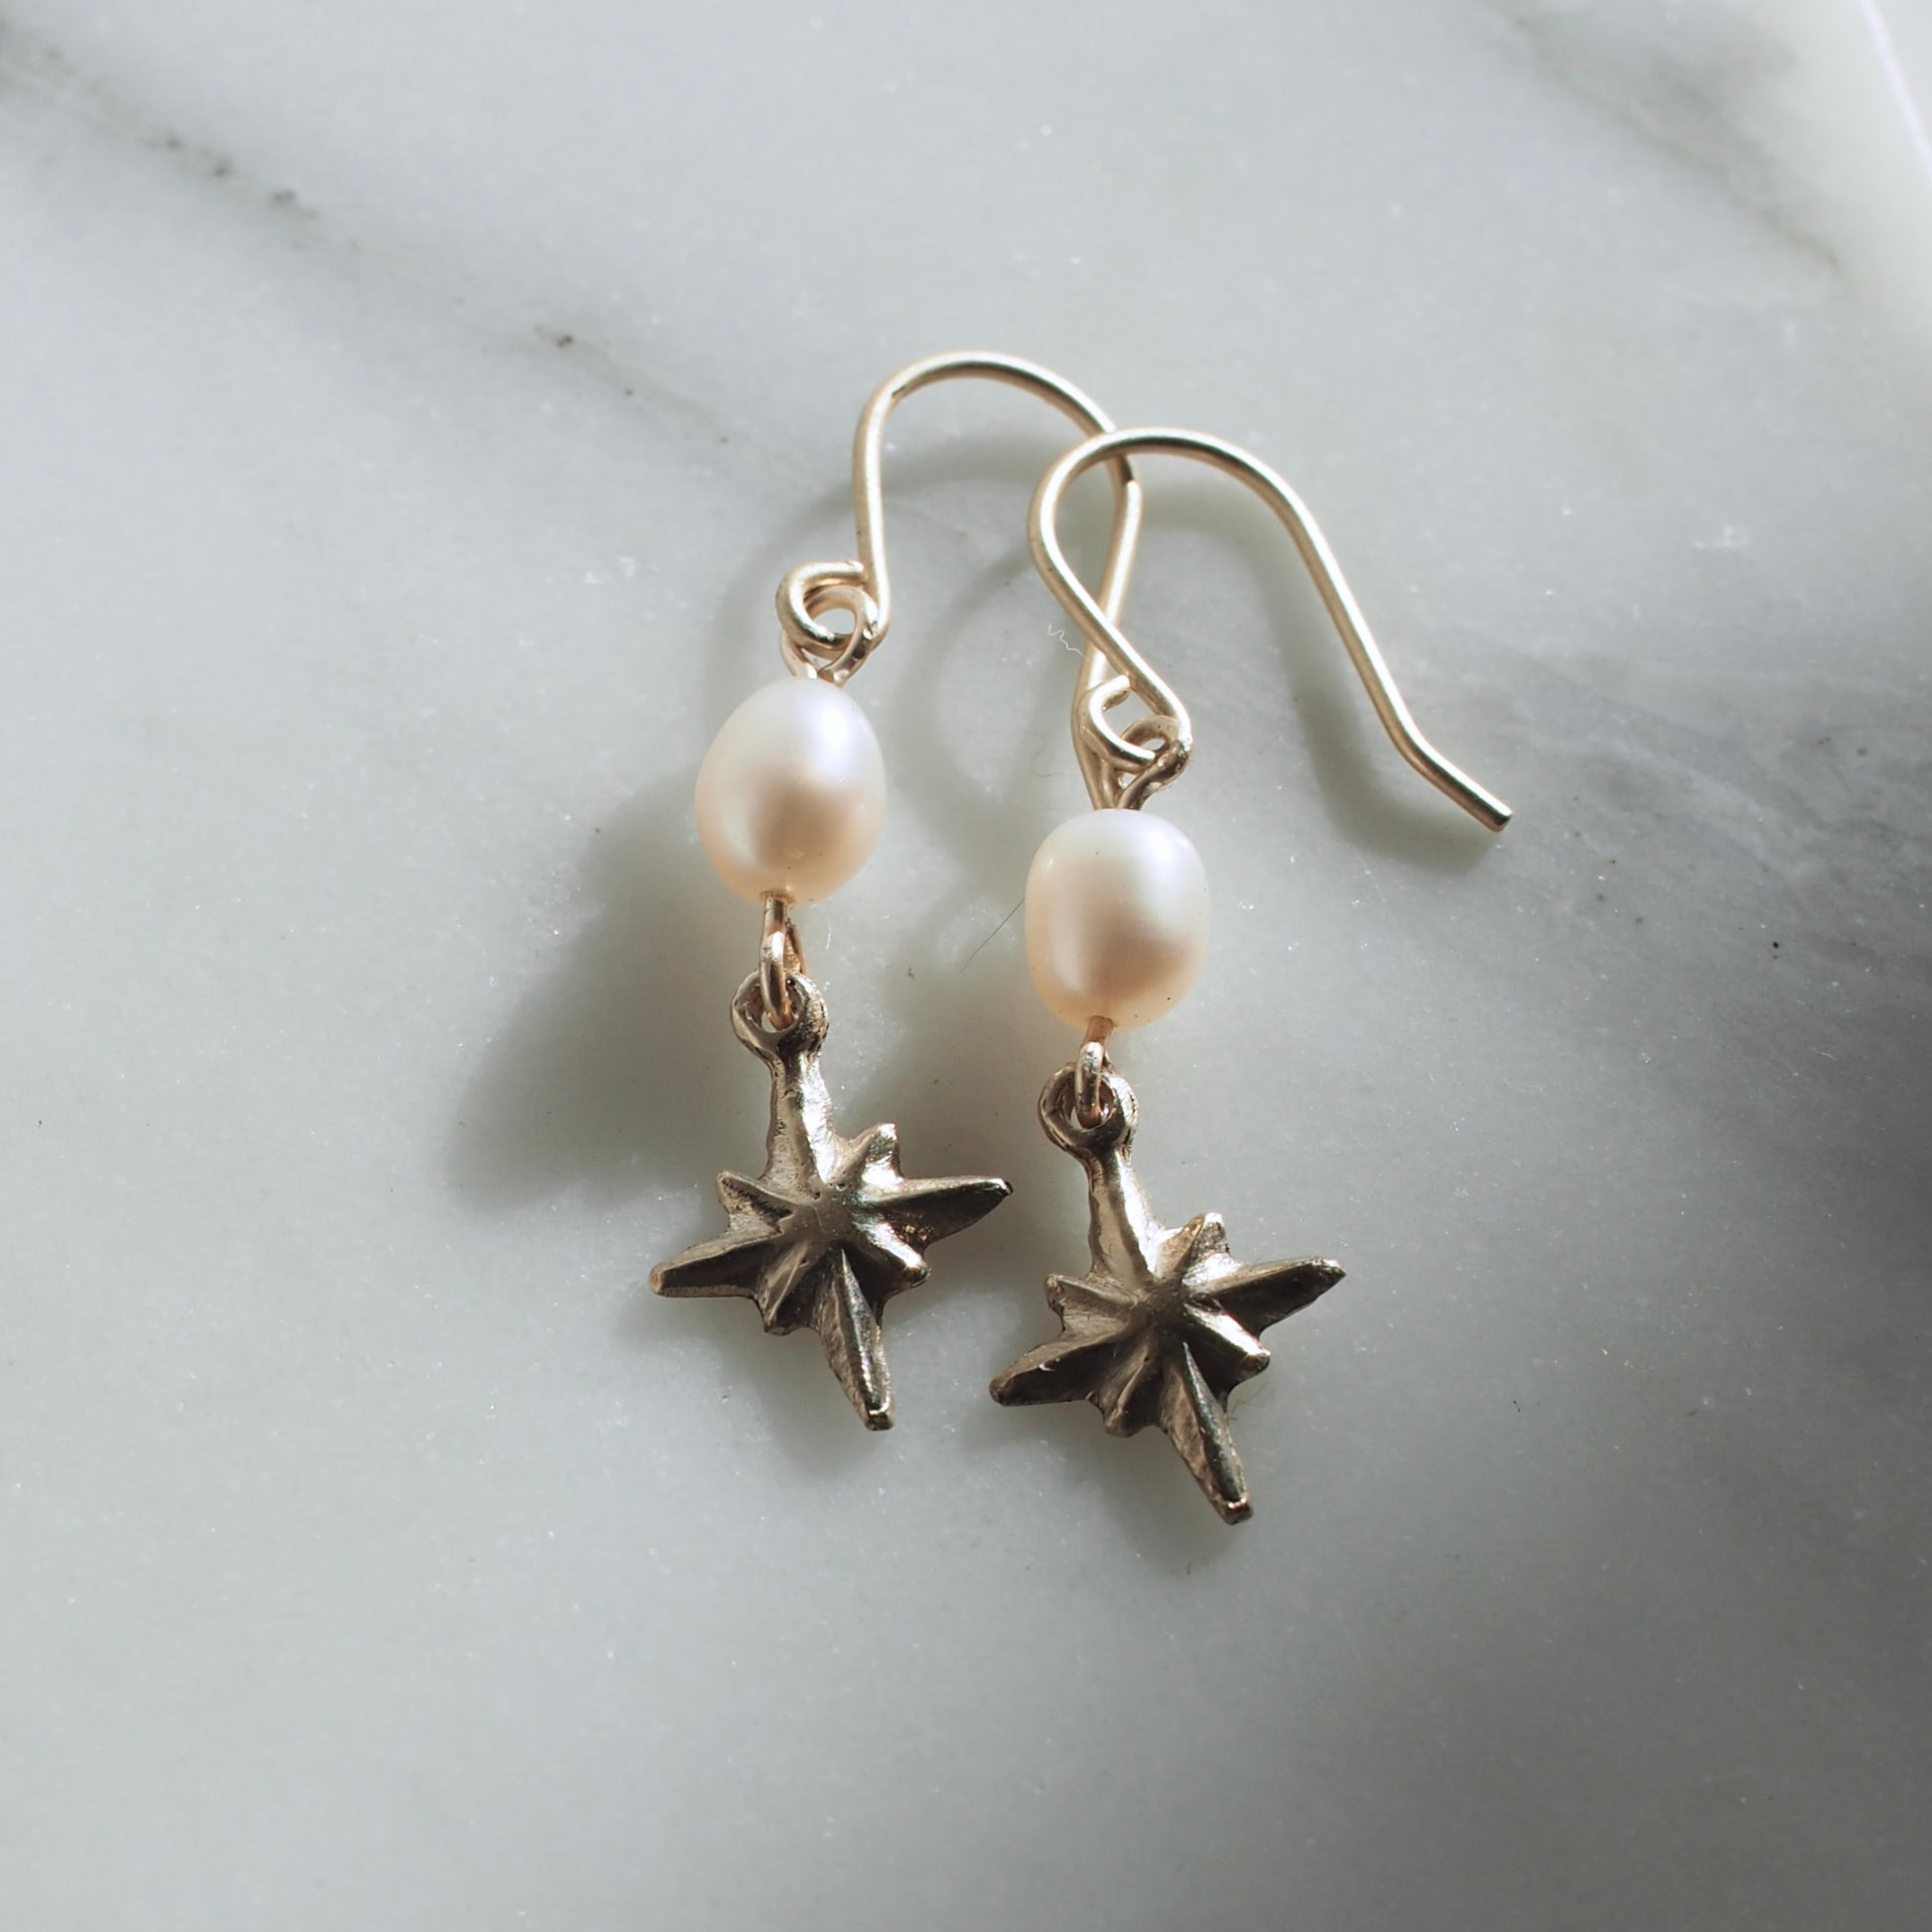 Celestial pearl earrings, featuring a 7mm oval shaped pearl with a tiny silver or bronze star hanging below it. 